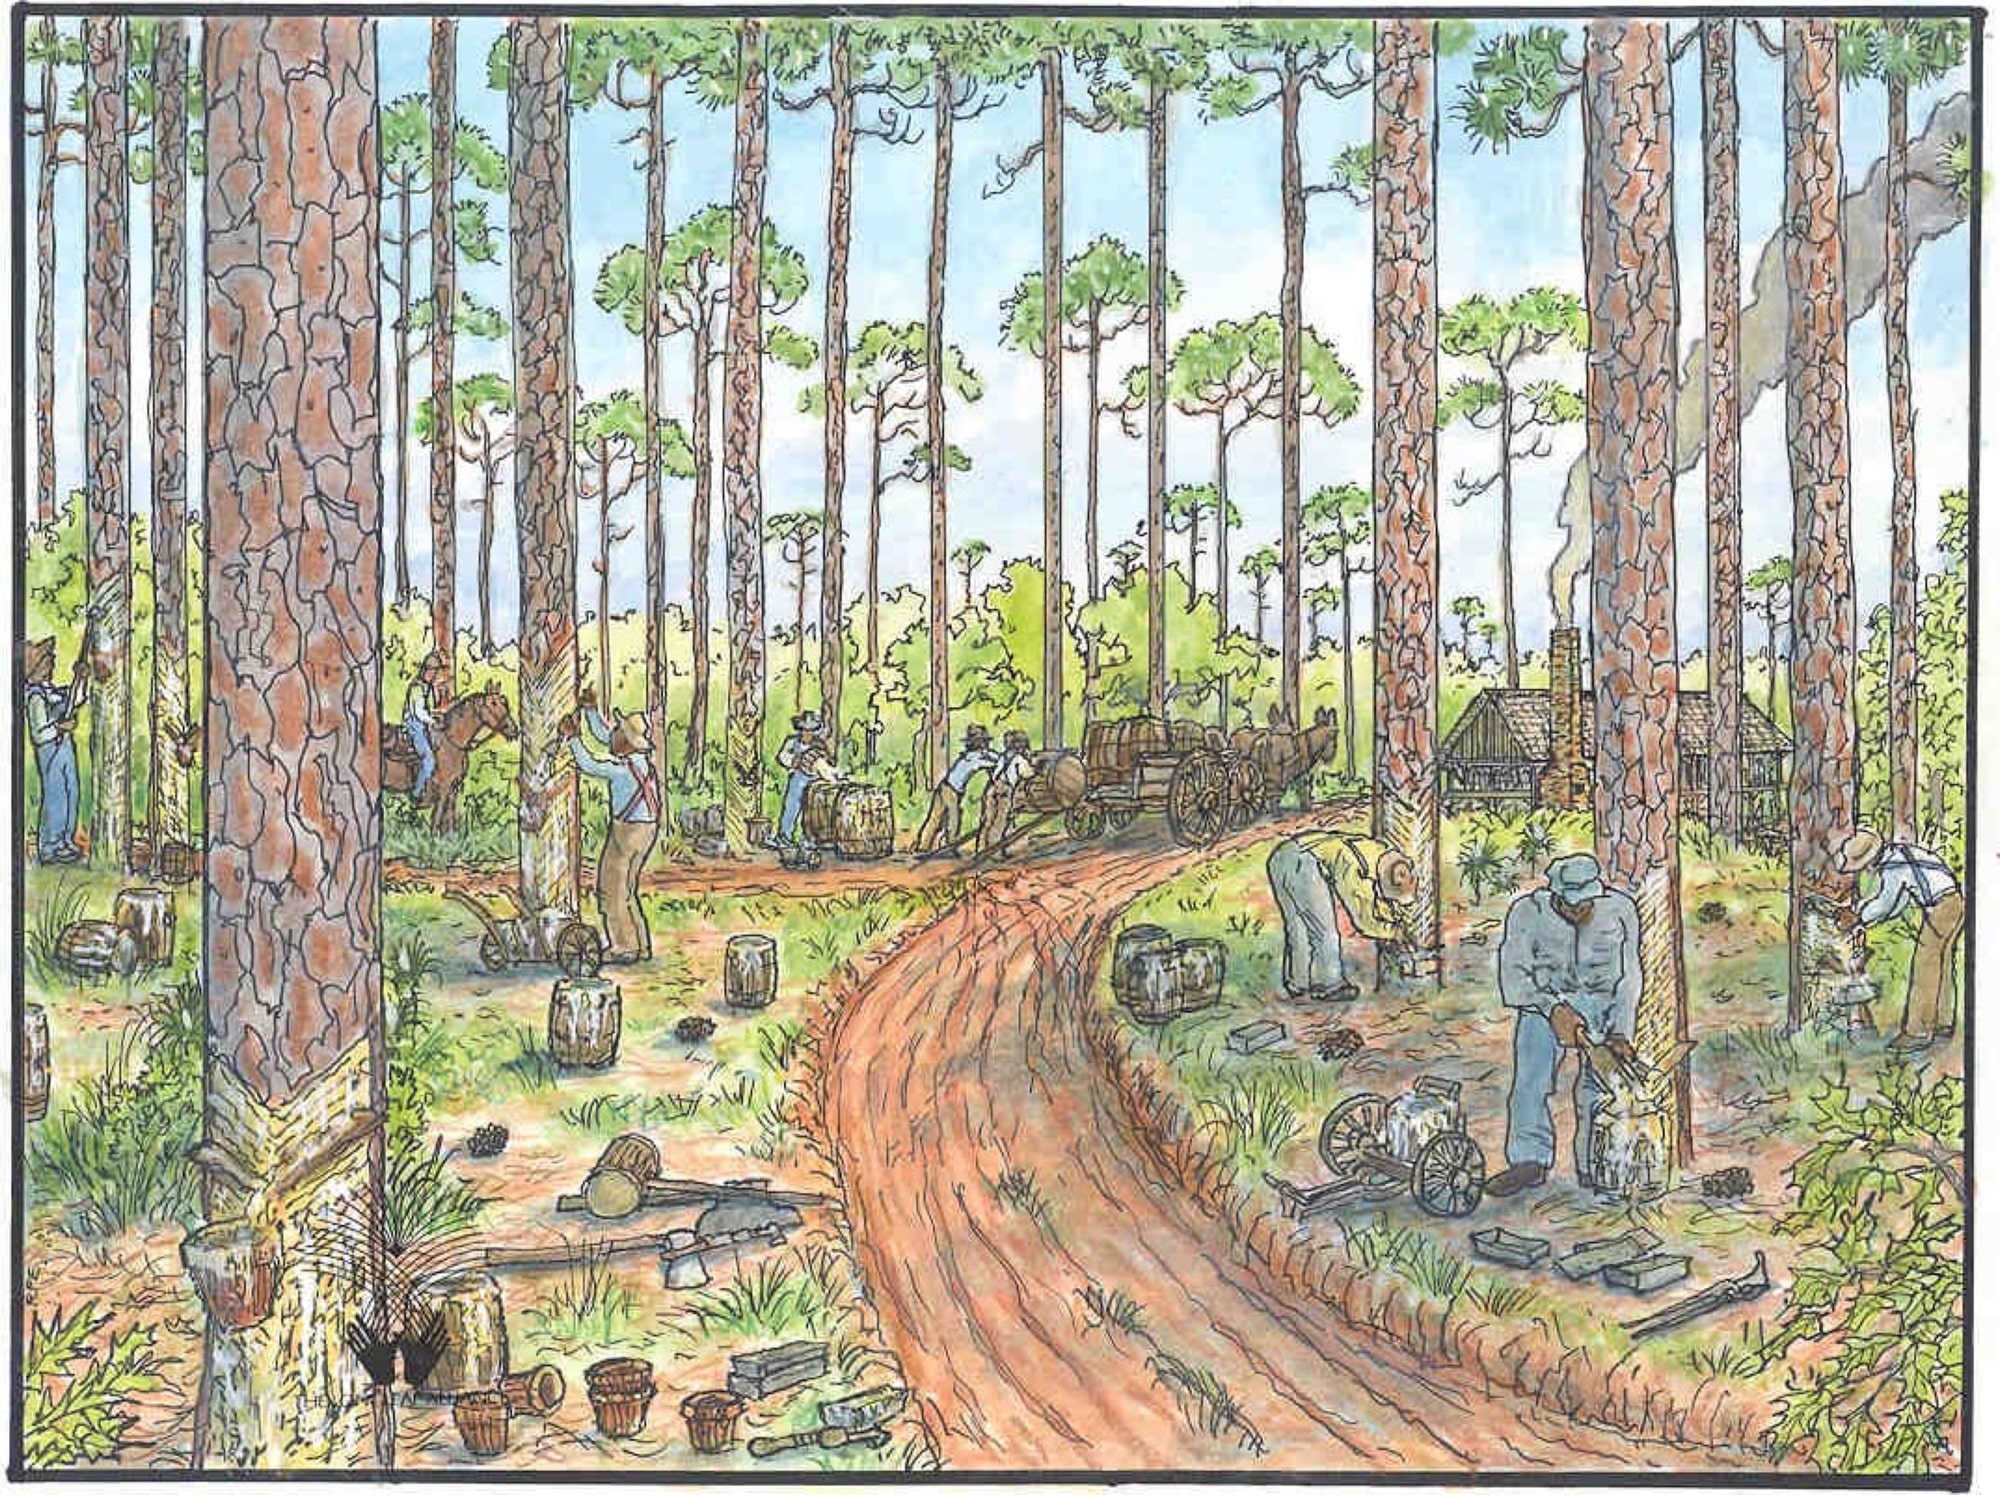 In the early decades of the twentieth century, the longleaf pine region was responsible for producing 70 percent of the world's supply of naval stores – the collective name for products such as tar, pitch, spirits of turpentine and rosin obtained from the pine tree.